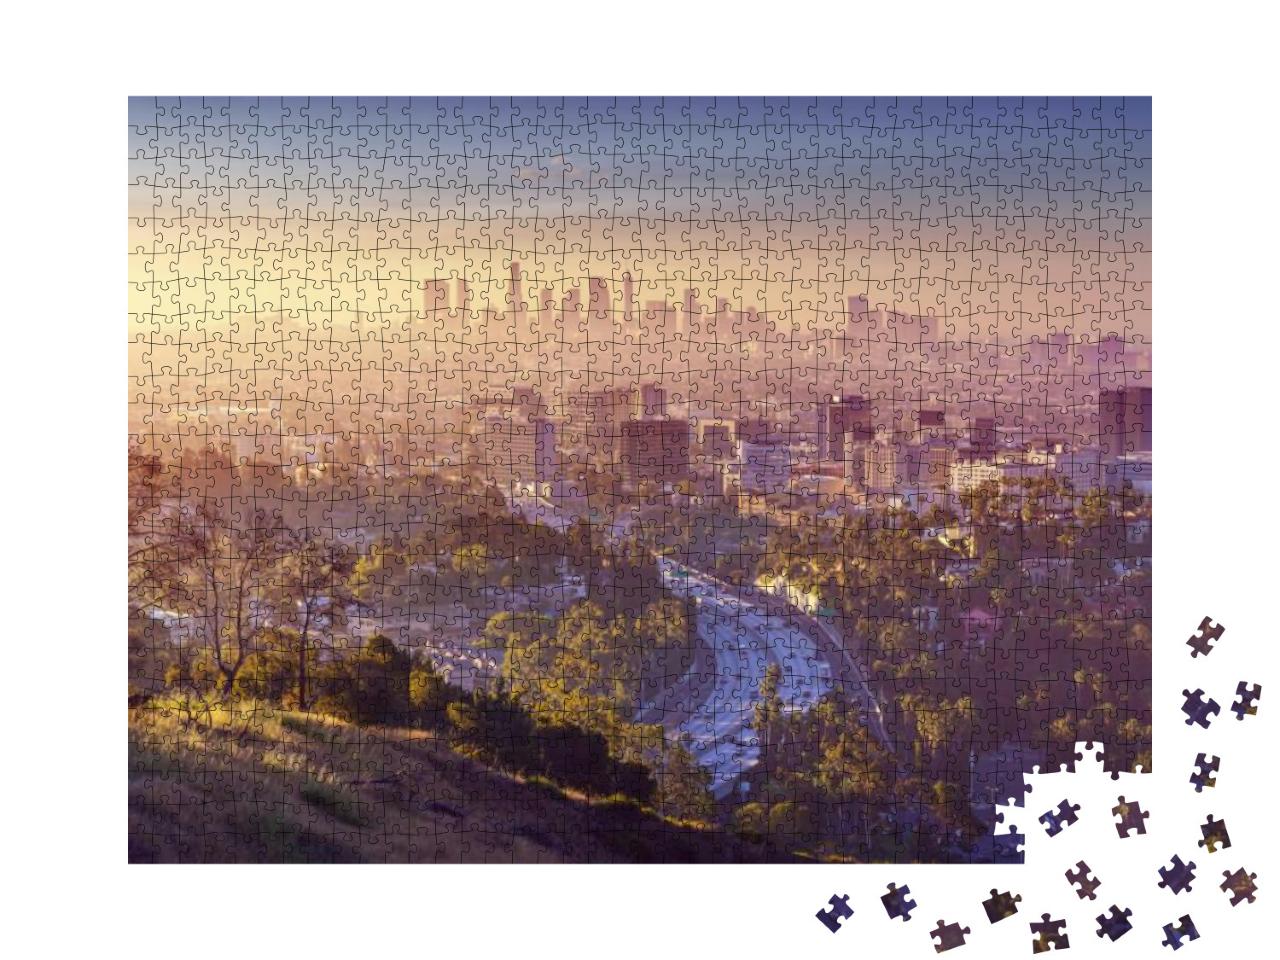 Panorama of Los Angeles At Sunrise... Jigsaw Puzzle with 1000 pieces